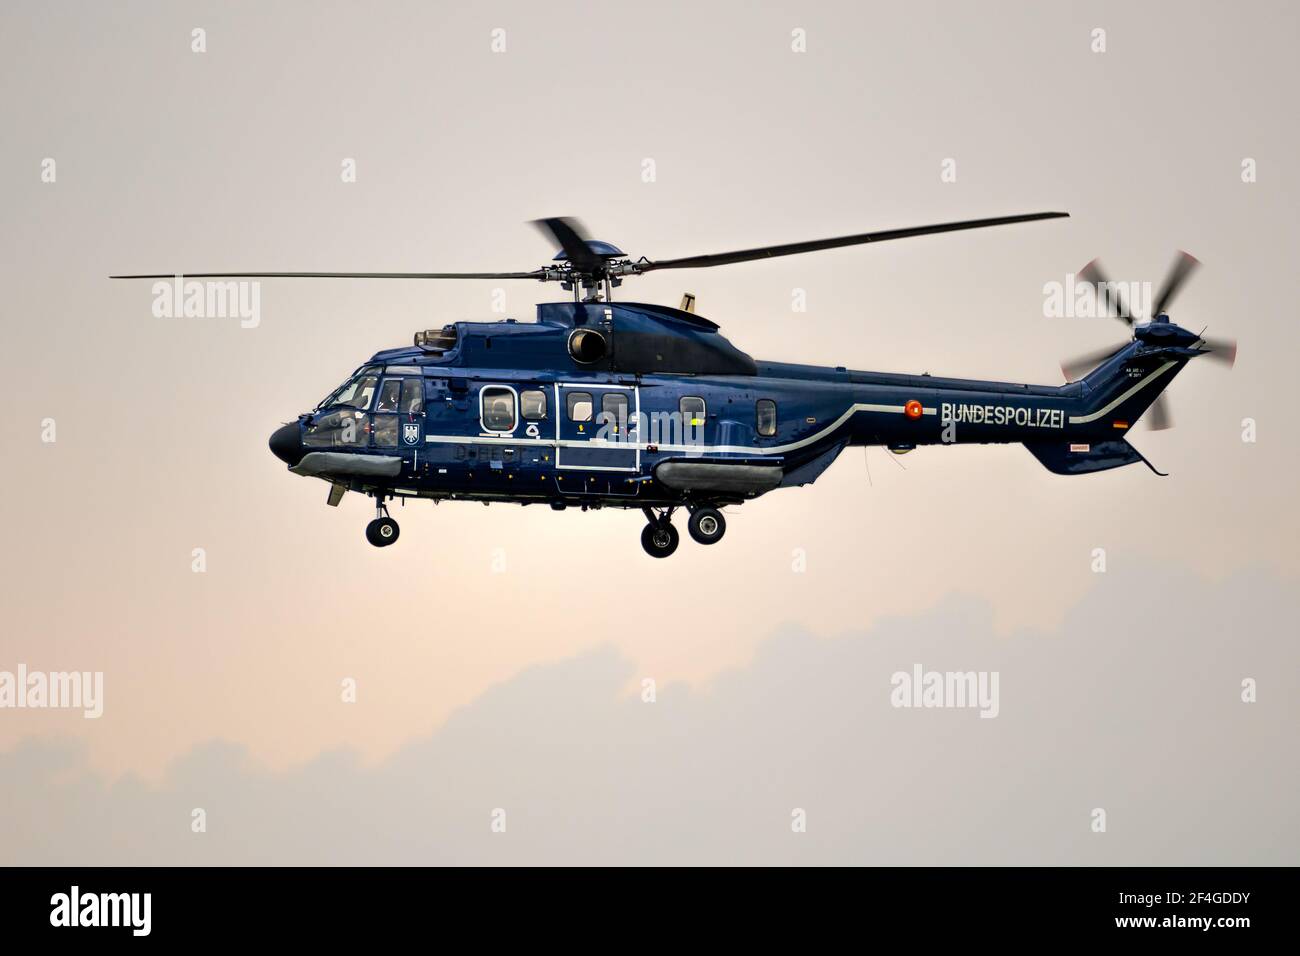 German Federal Police (Bundespolizei) Eurocopter AS332 Super Puma helicopter in flight. Germany - June 14, 2019 Stock Photo